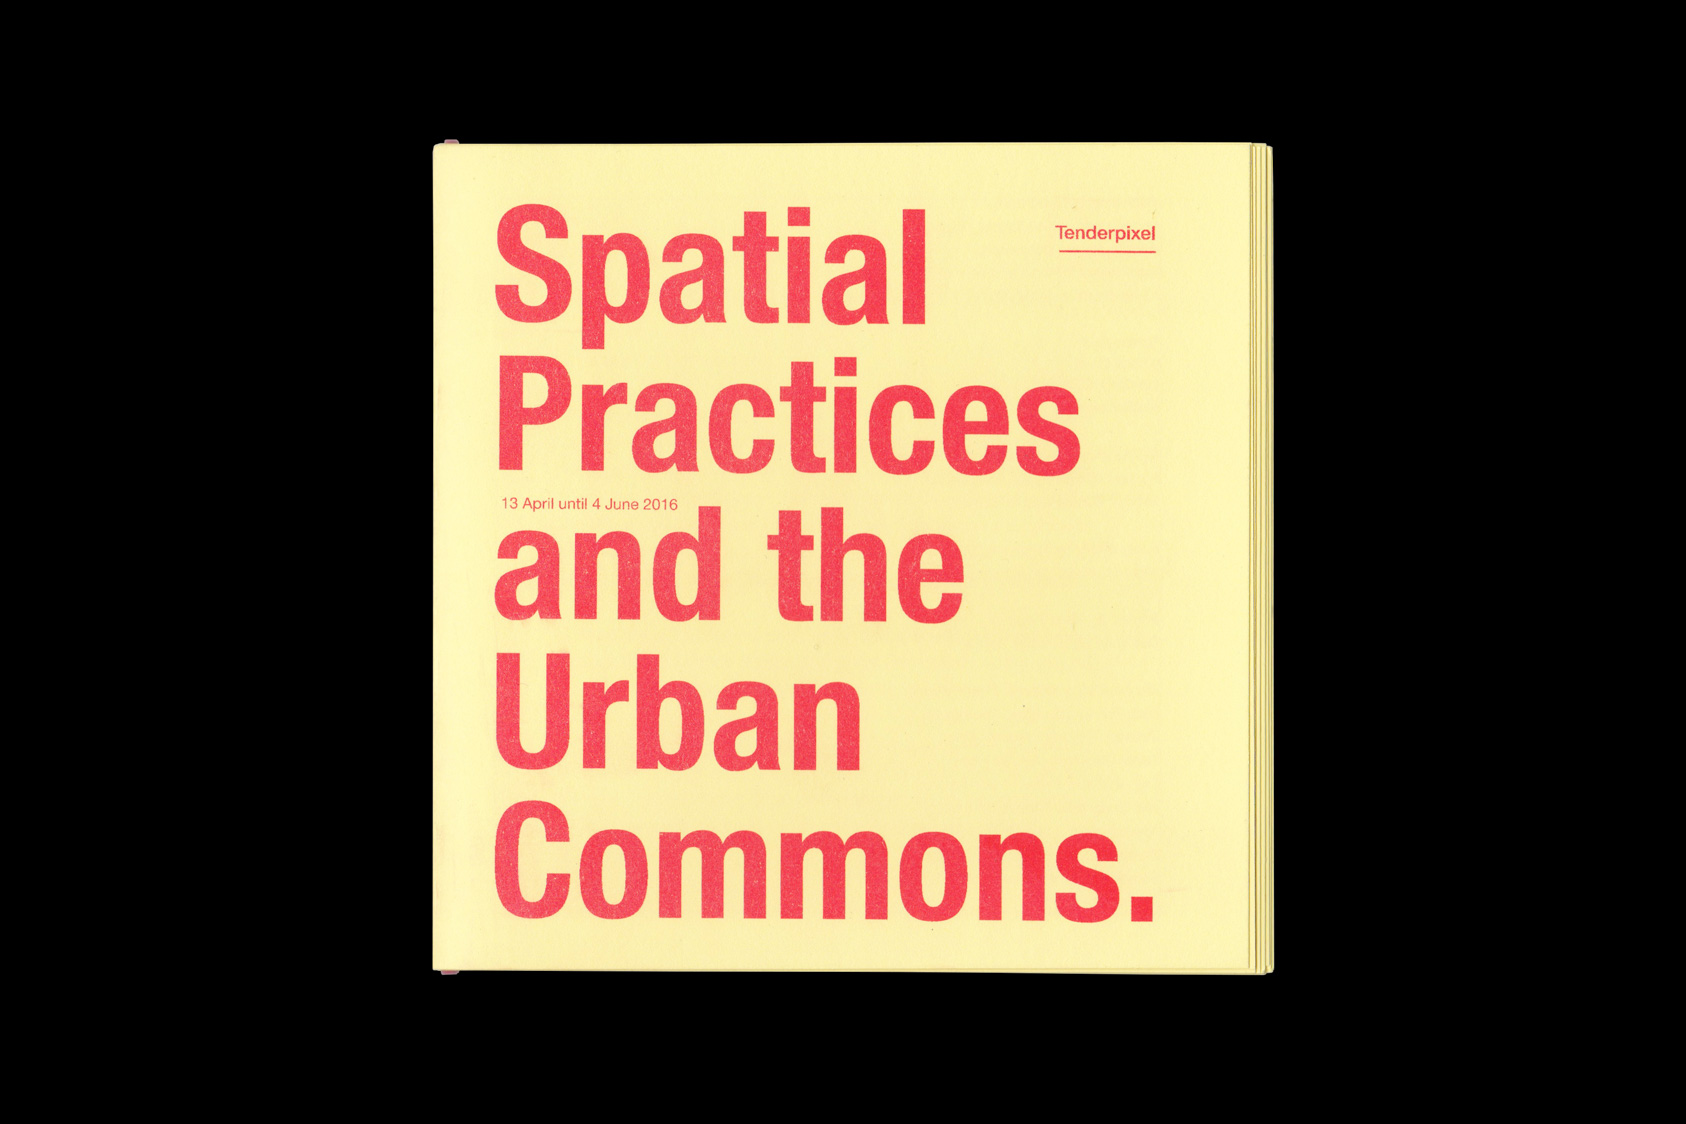 Spatial Practices and the Urban Commons - publication accompanying exhibition for Tenderpixel, 2016 by the agency for emerging ideas